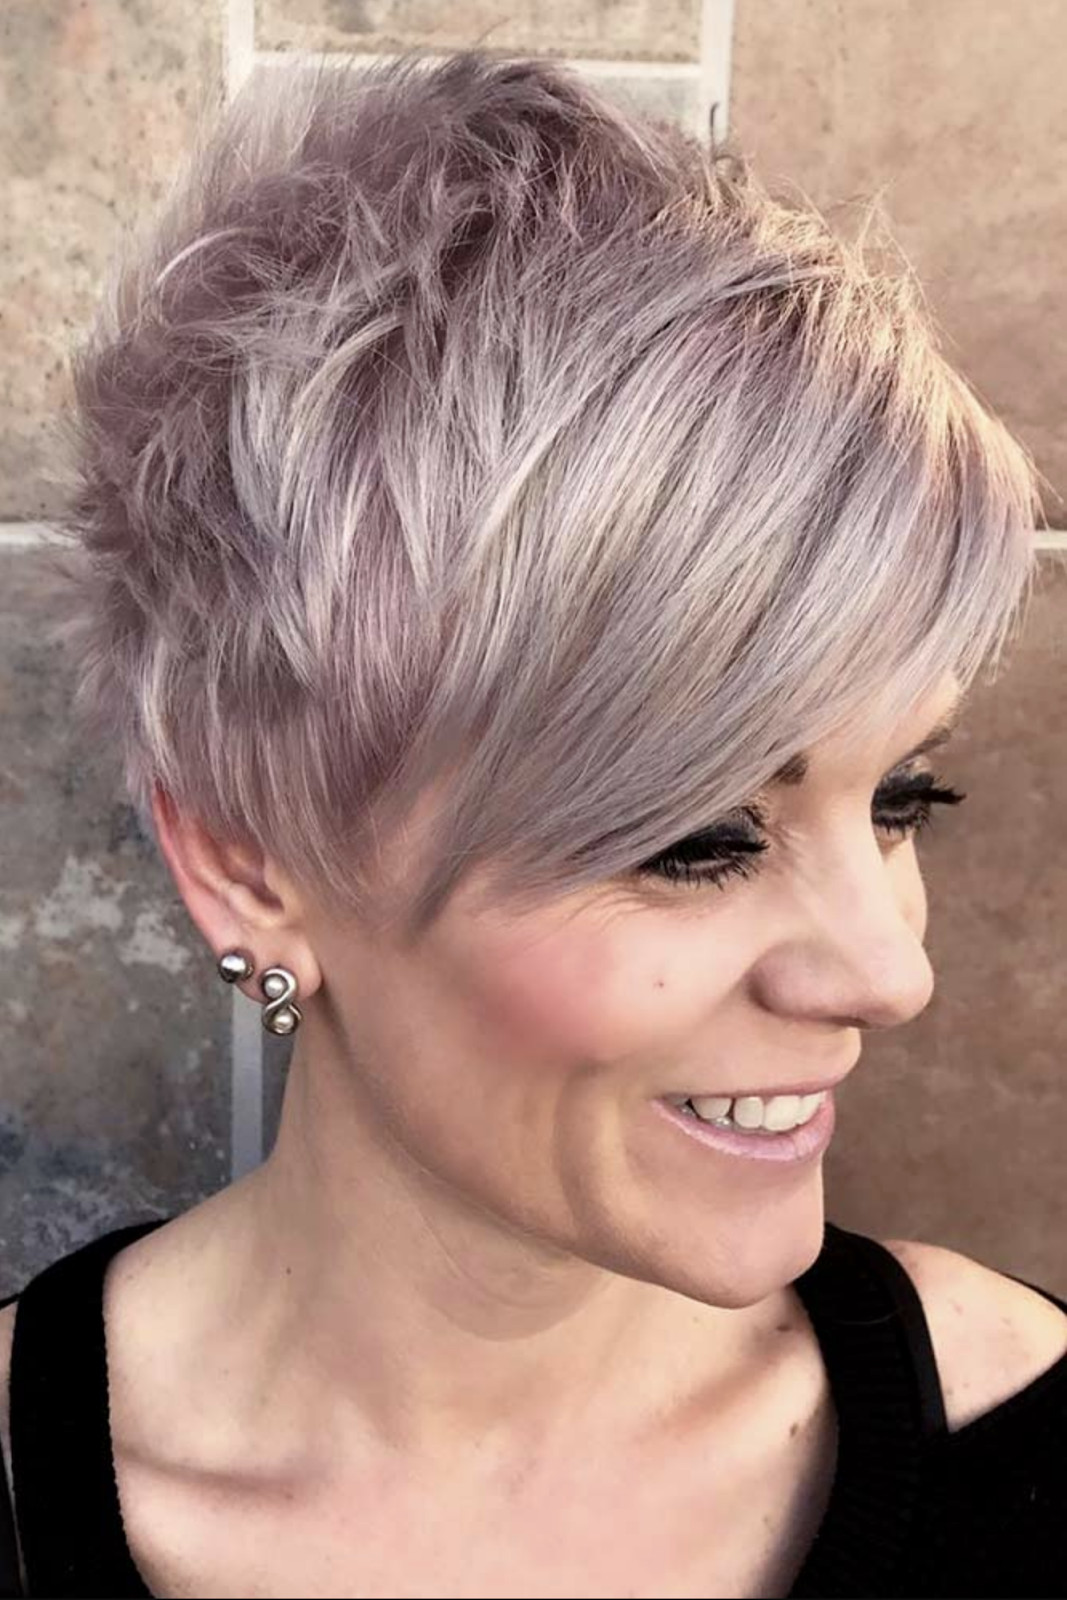 2020 Short Hairstyles For Thin Hair
 2019 2020 Short Hairstyles for Women Over 50 That Are